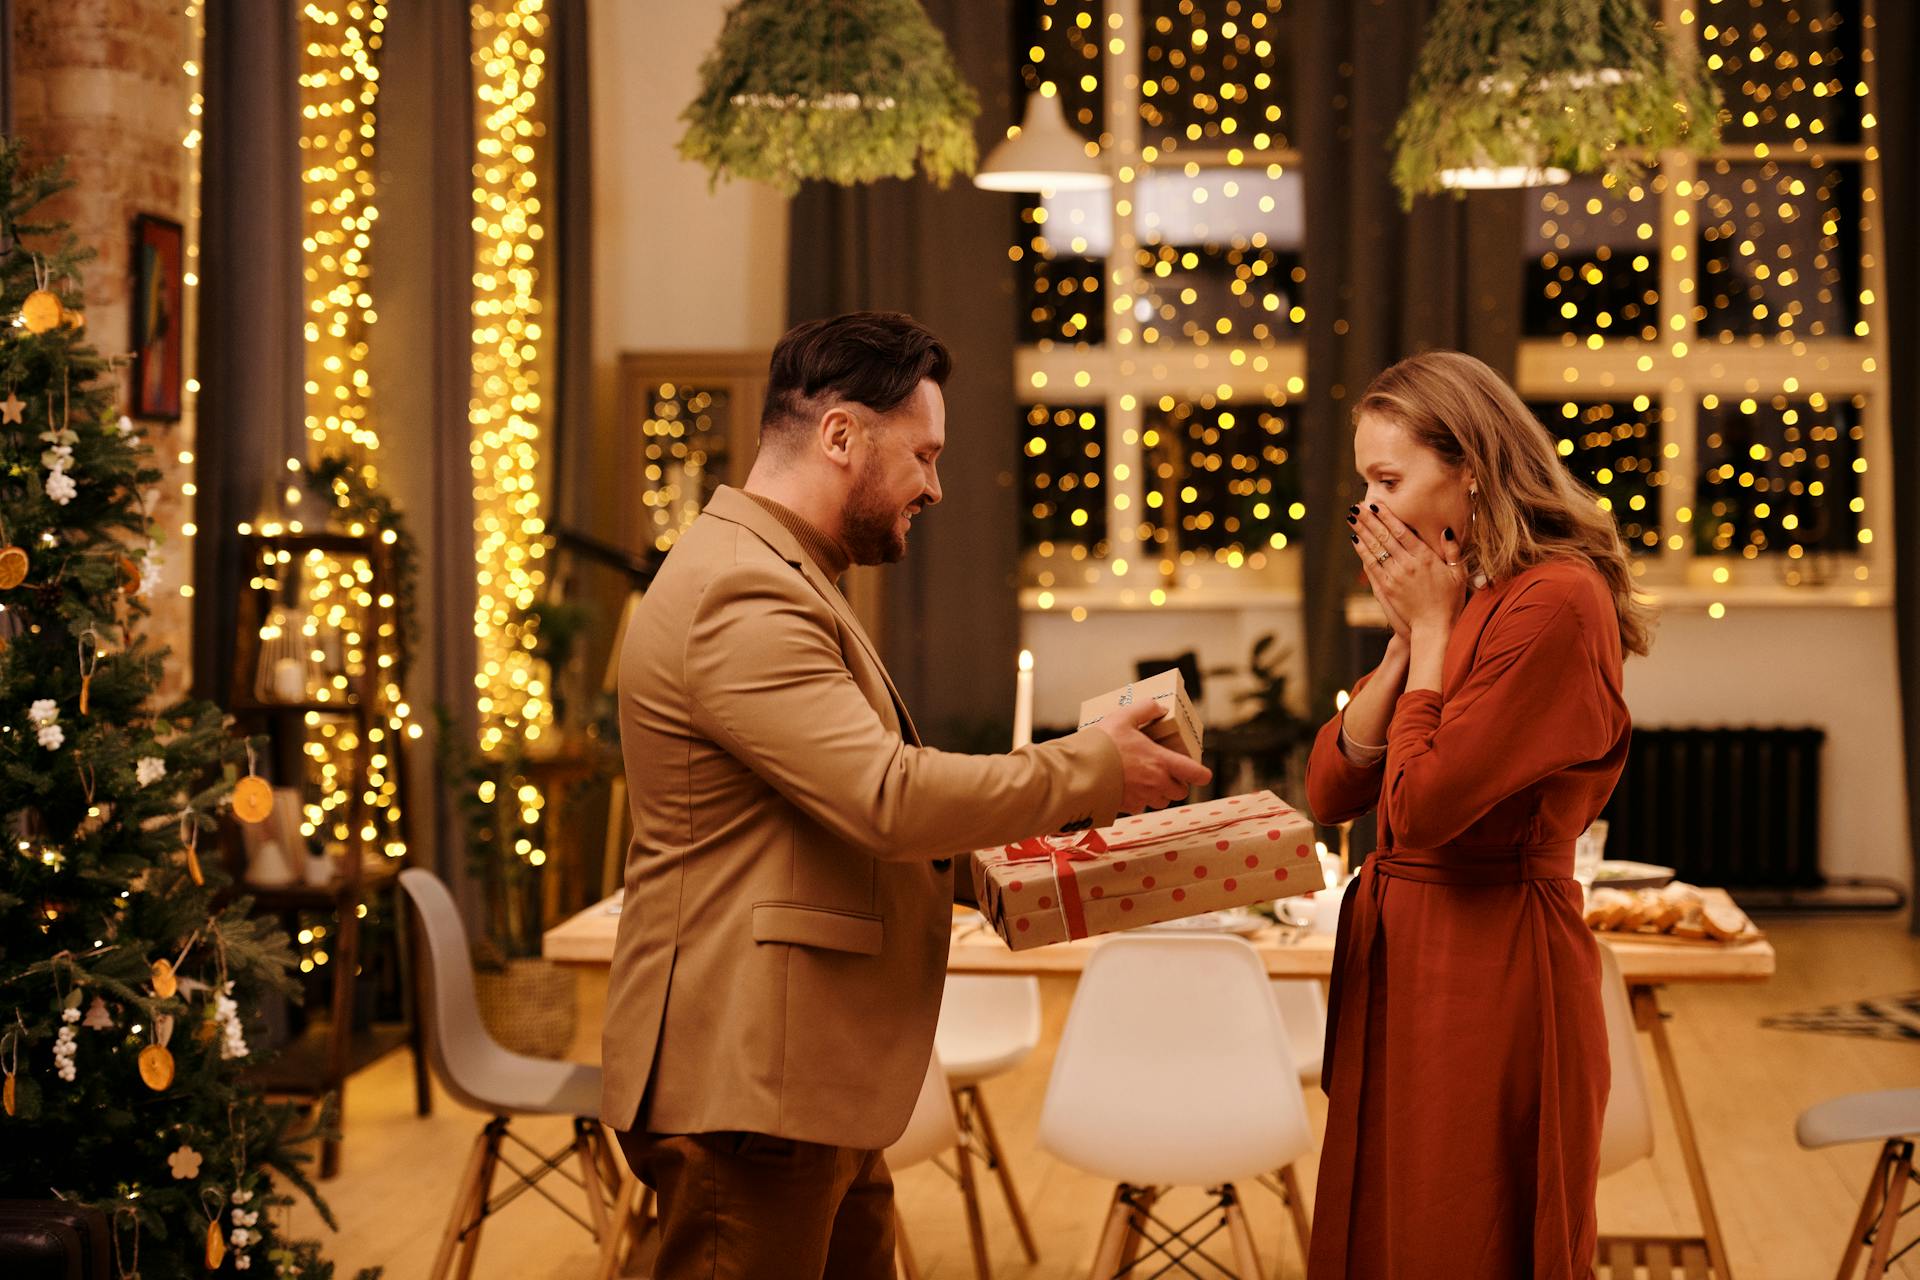 A man giving a Christmas present to his fiancée | Source: Pexels